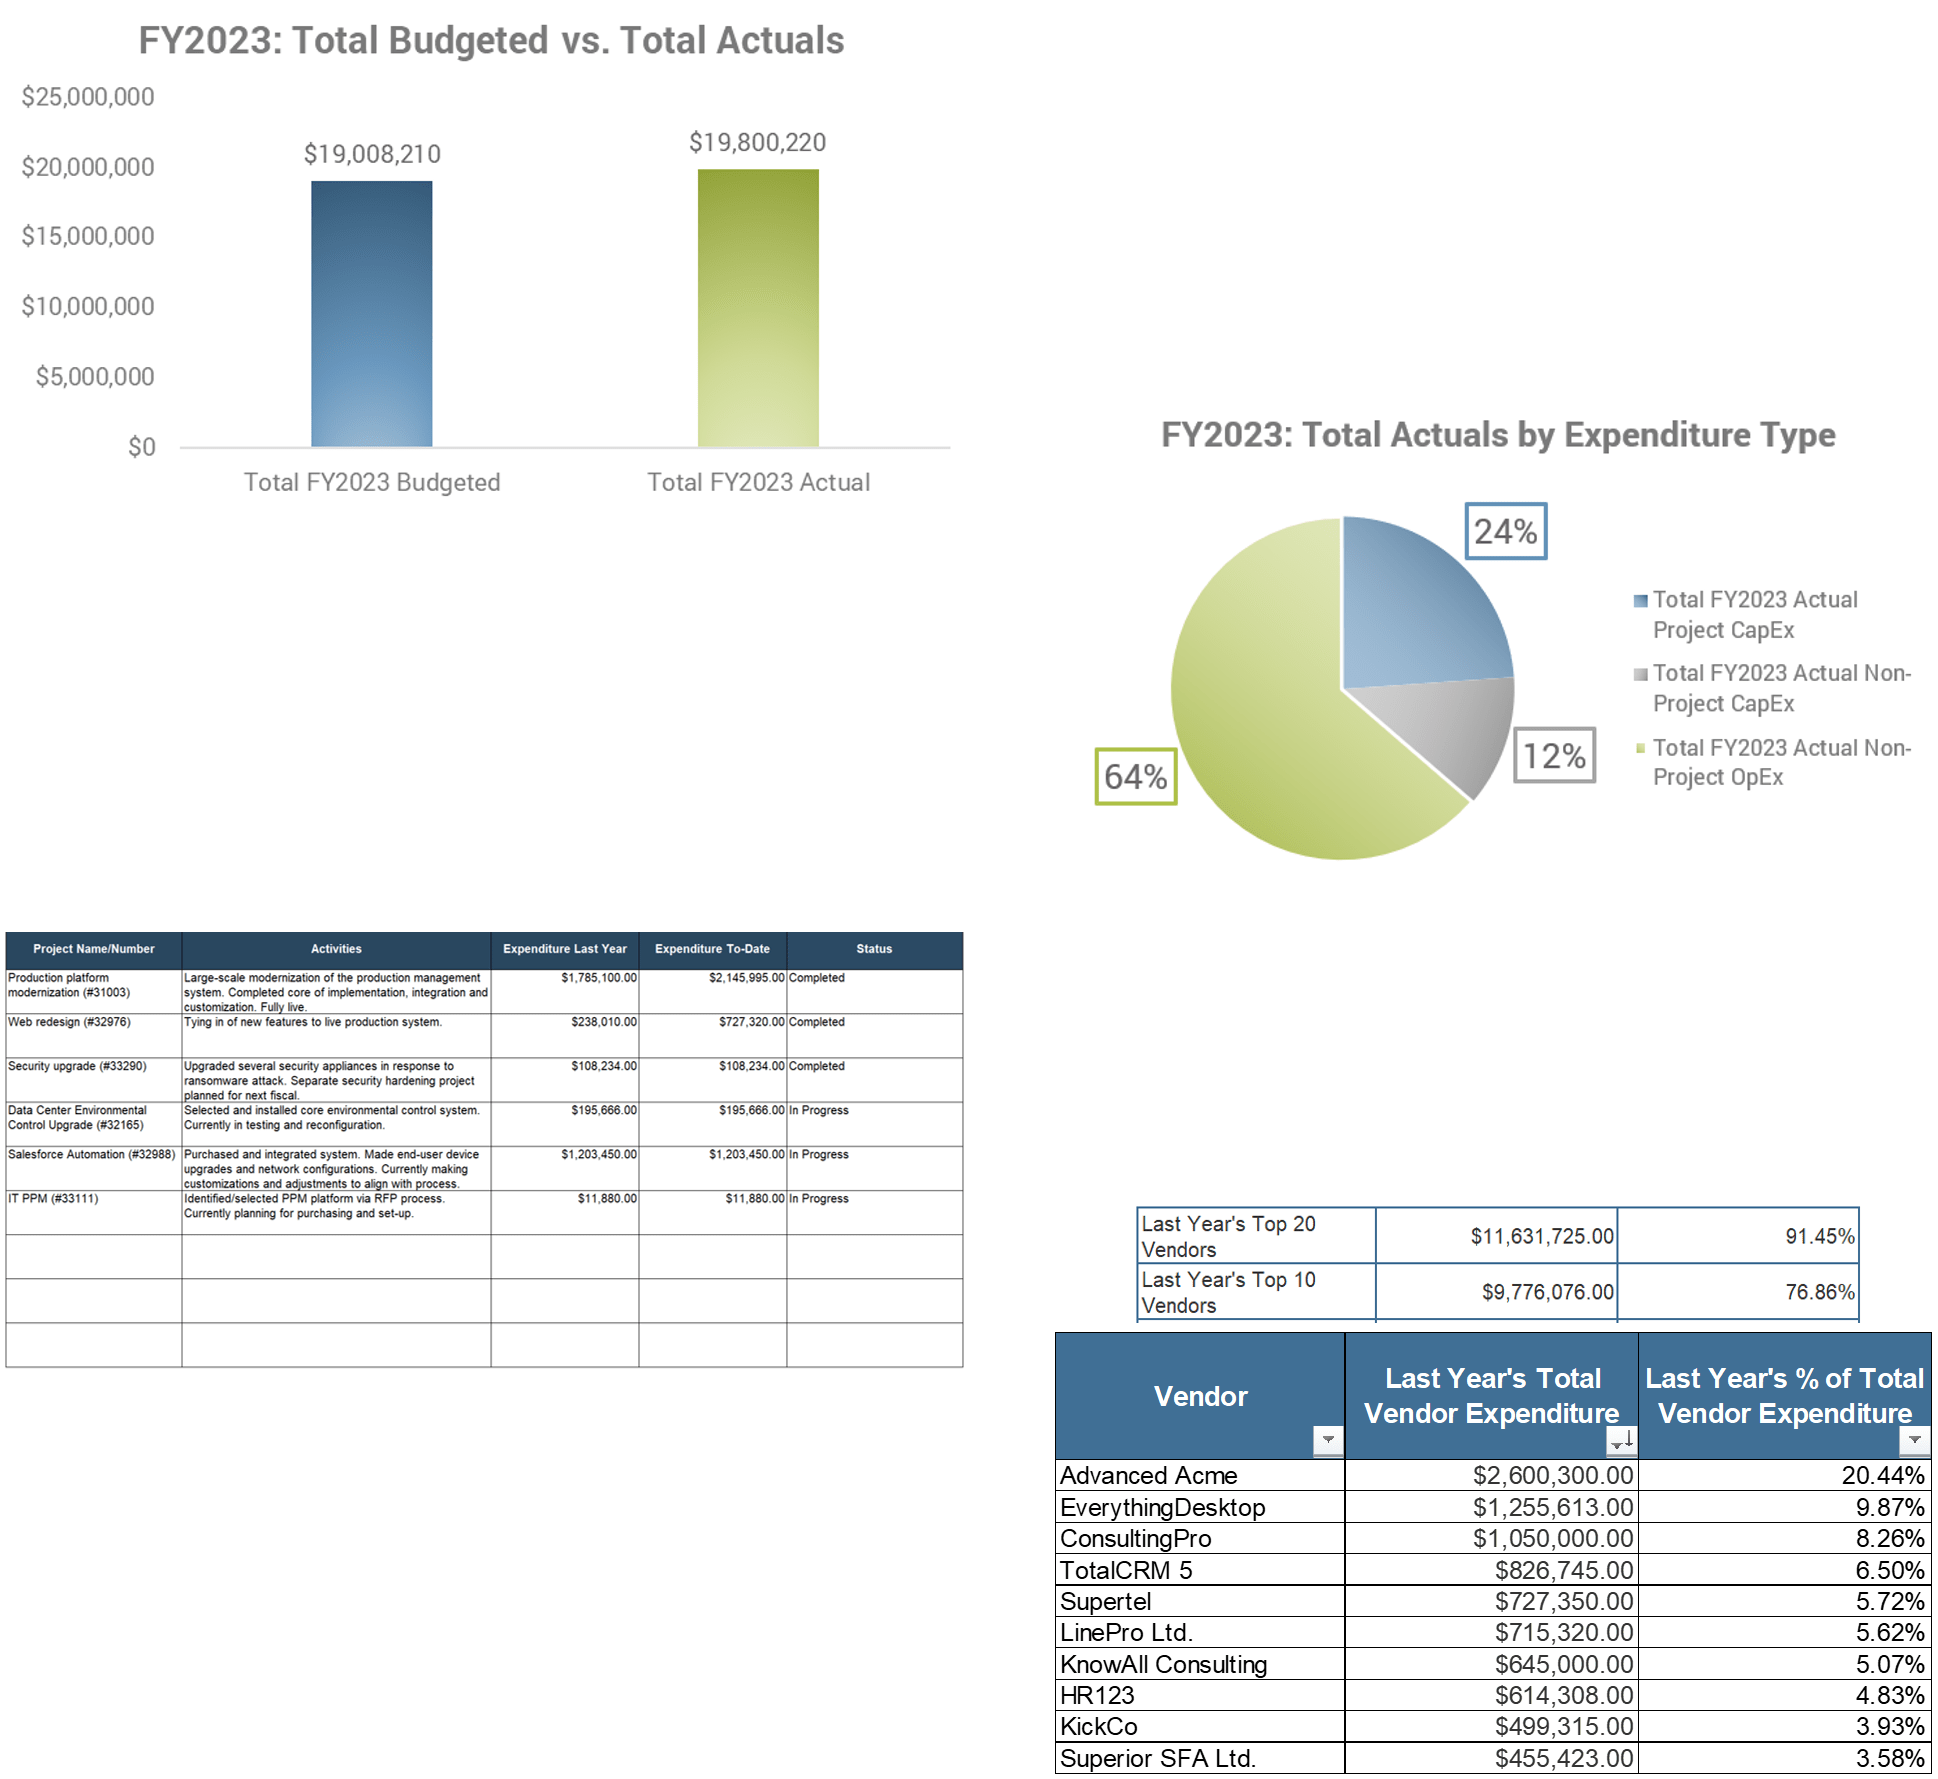 The image contains screenshots from Tabs 1, 3, and 6 of the IT Cost Forecasting and Budgeting Workbook.